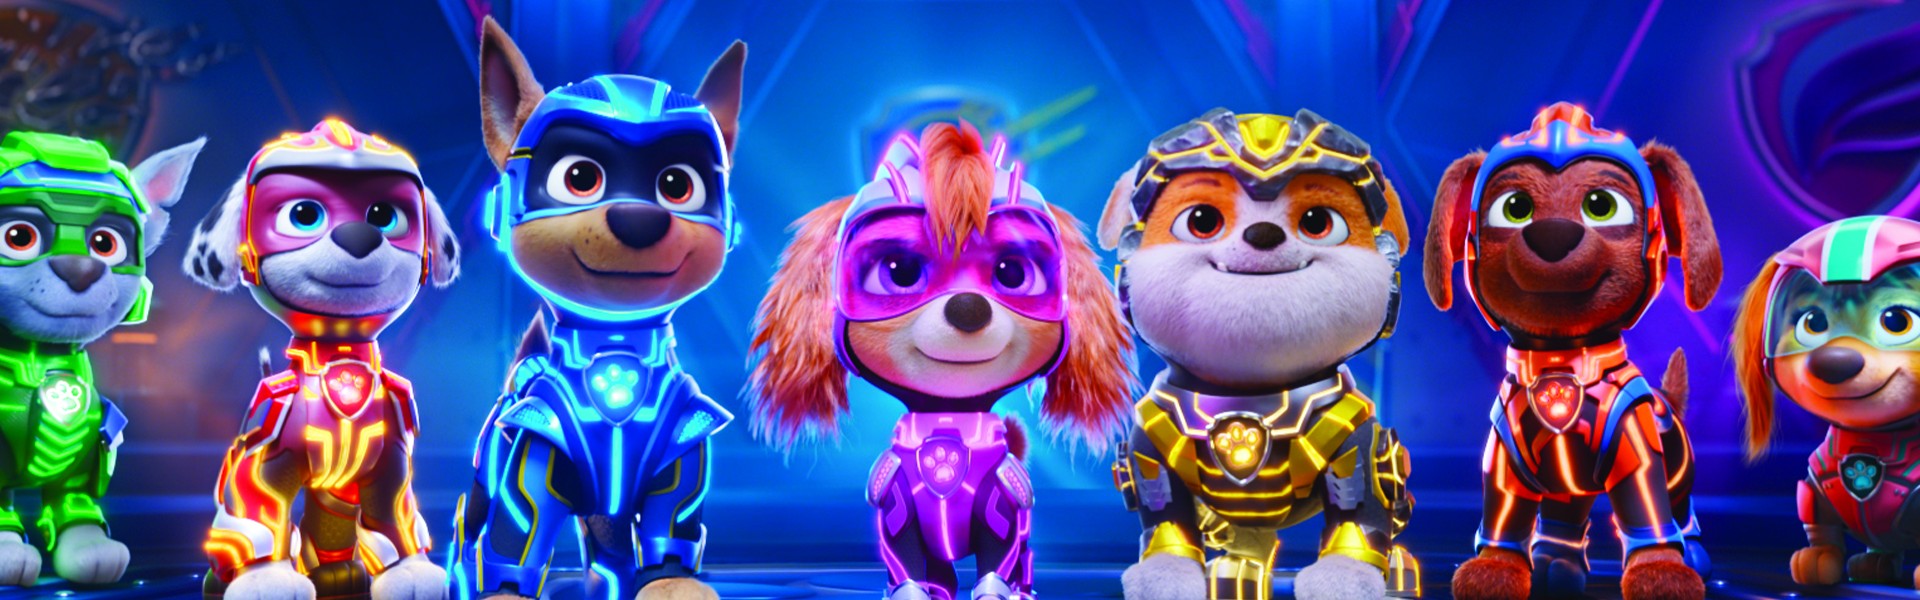 Box Office USA: Sequels on Top! “Paw Patrol 2” and “Saw X” Lead the Way